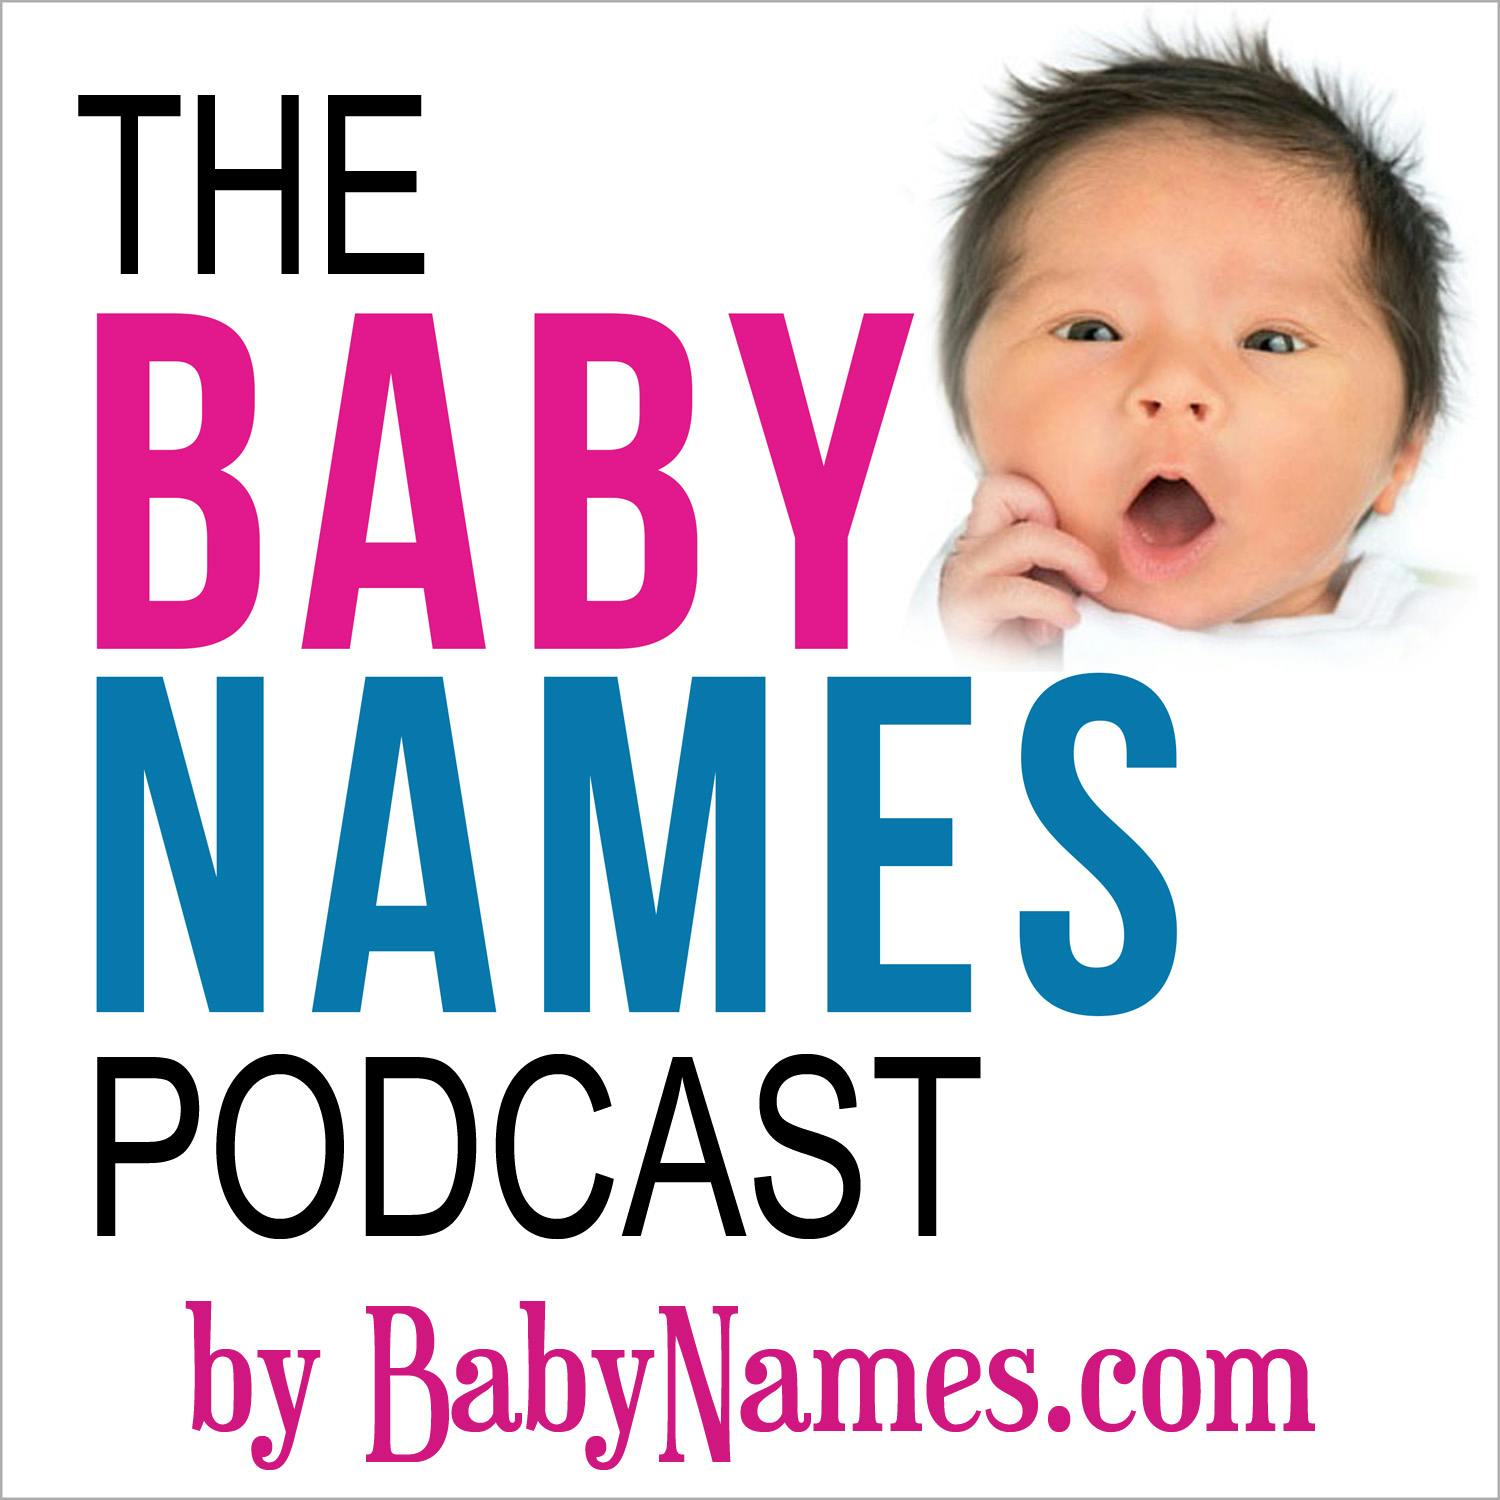 Oliver in 2023  Baby names, Baby names and meanings, Best